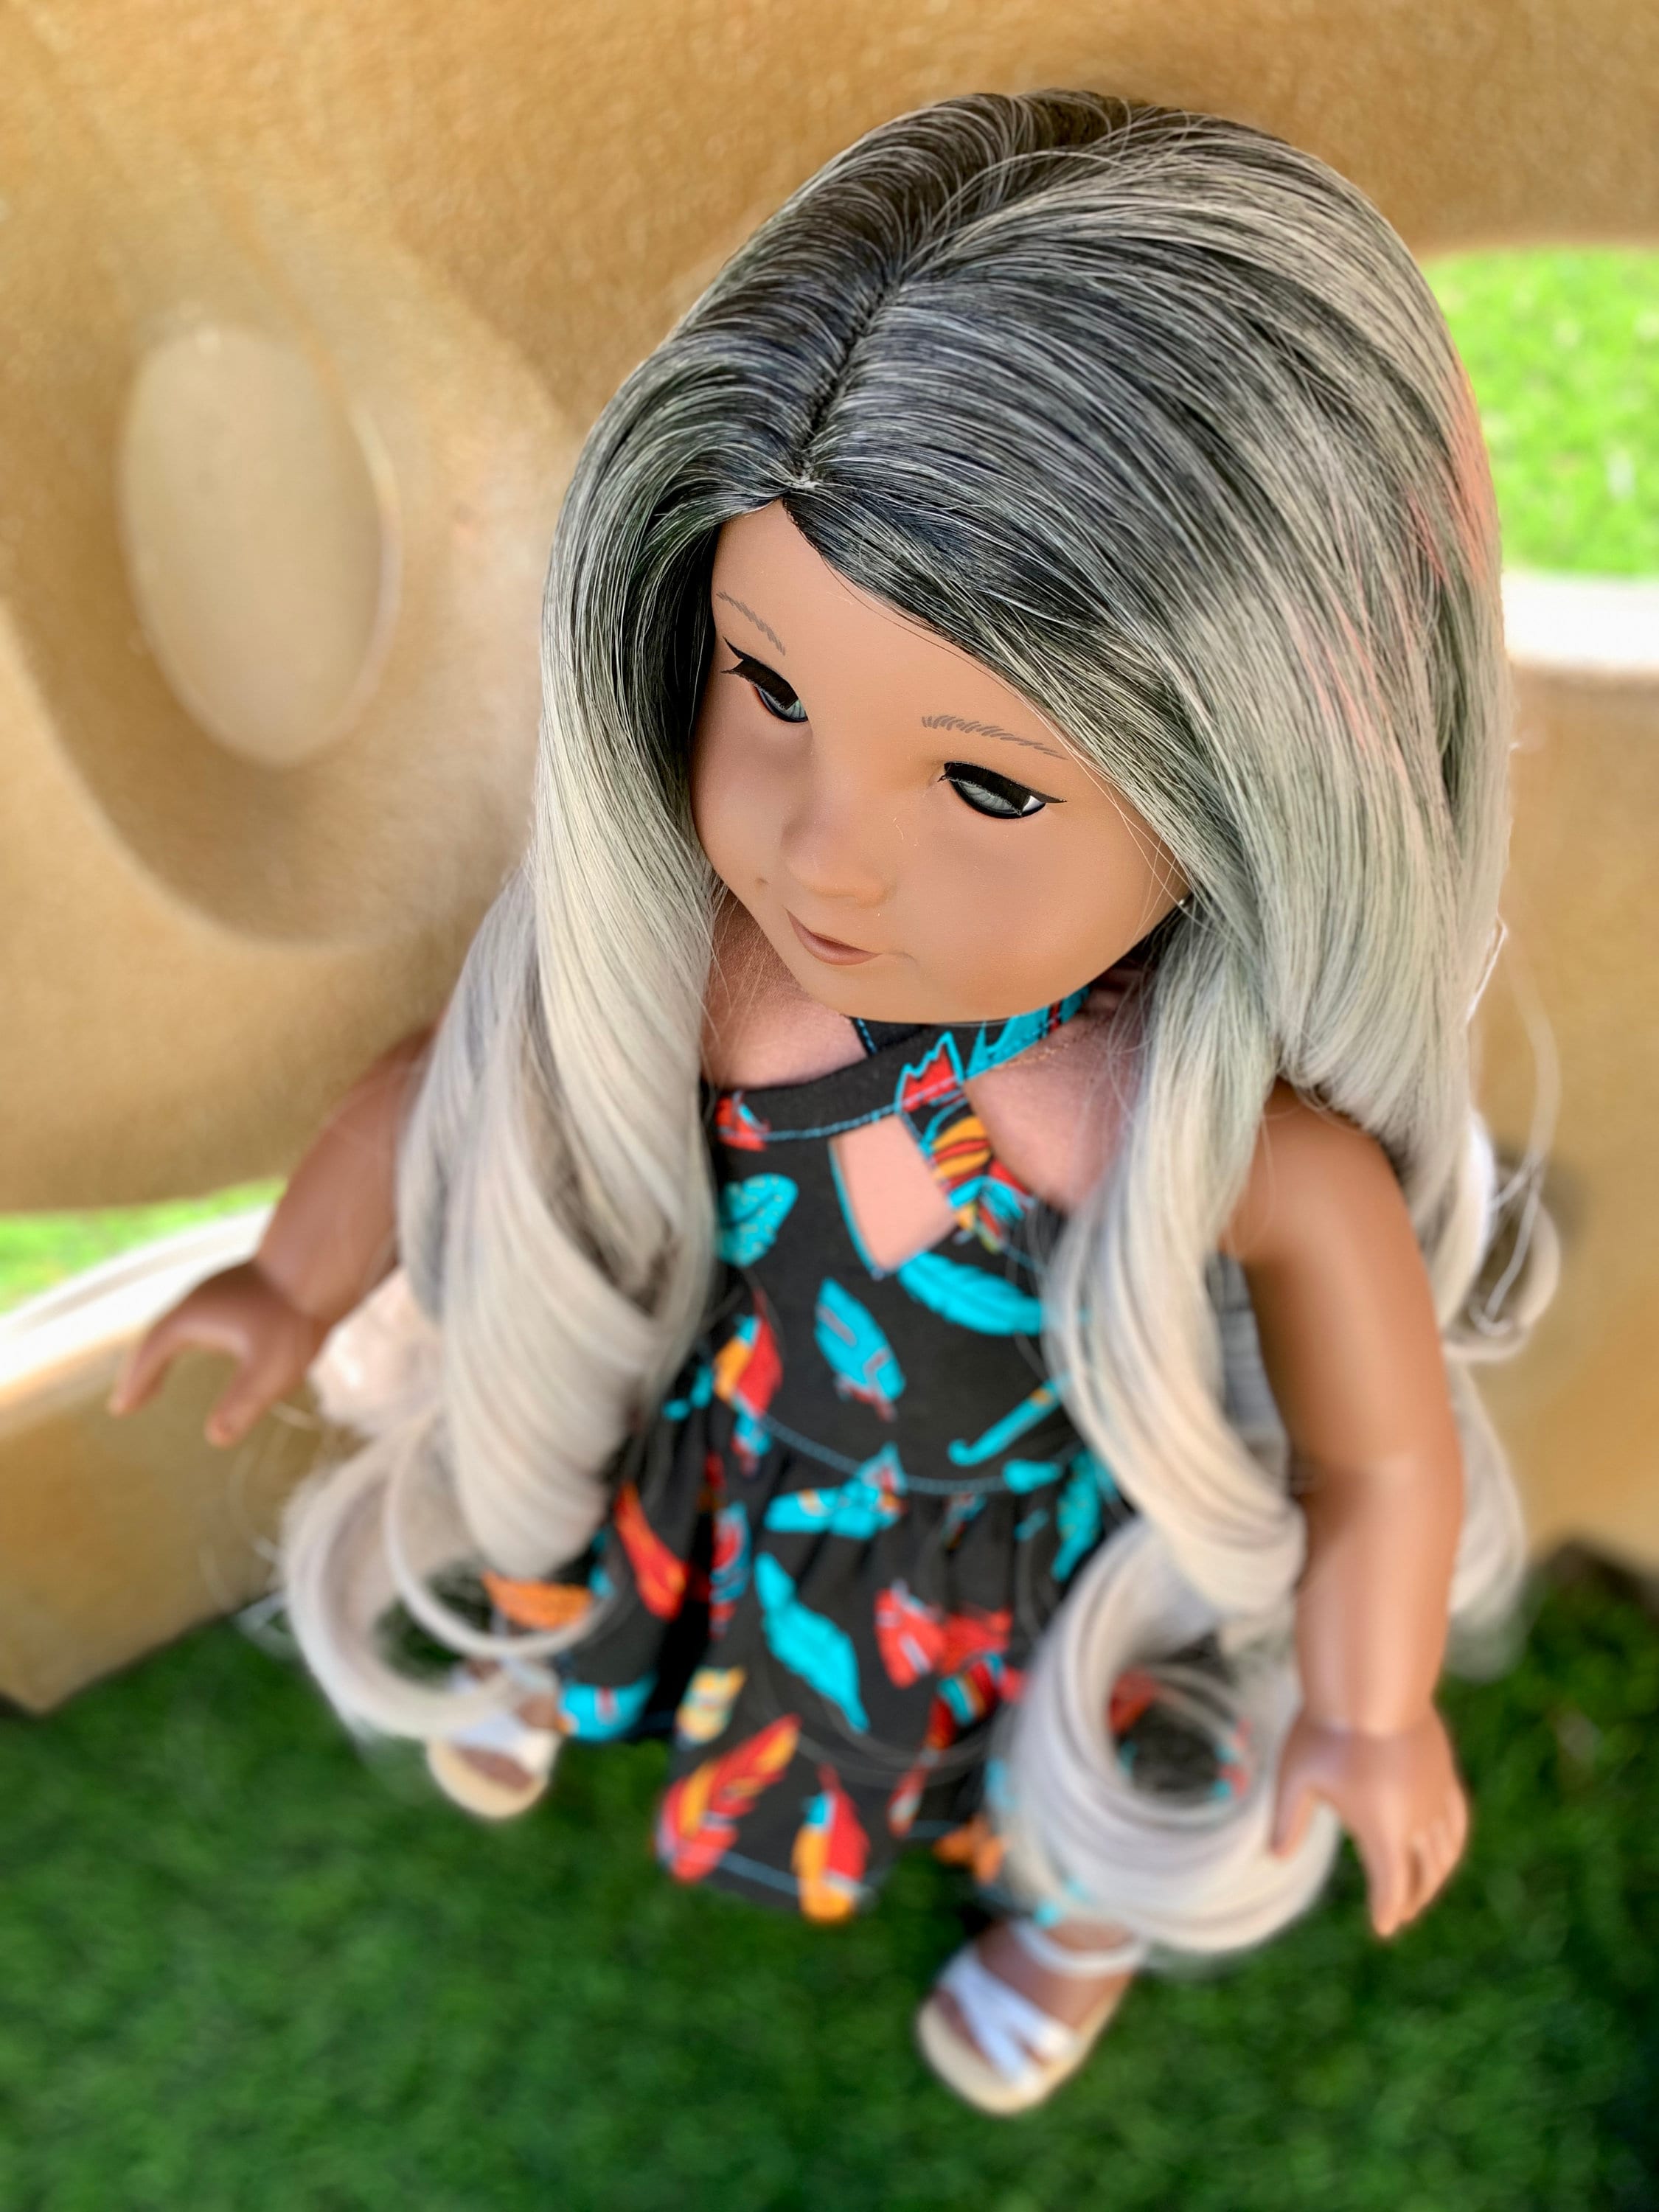 Custom DYED OMBRE Doll Wig for 18" American Girl Doll Heat Safe Tangle Resistant - fits 10-11" head size of all 18" dolls black  grey ombre